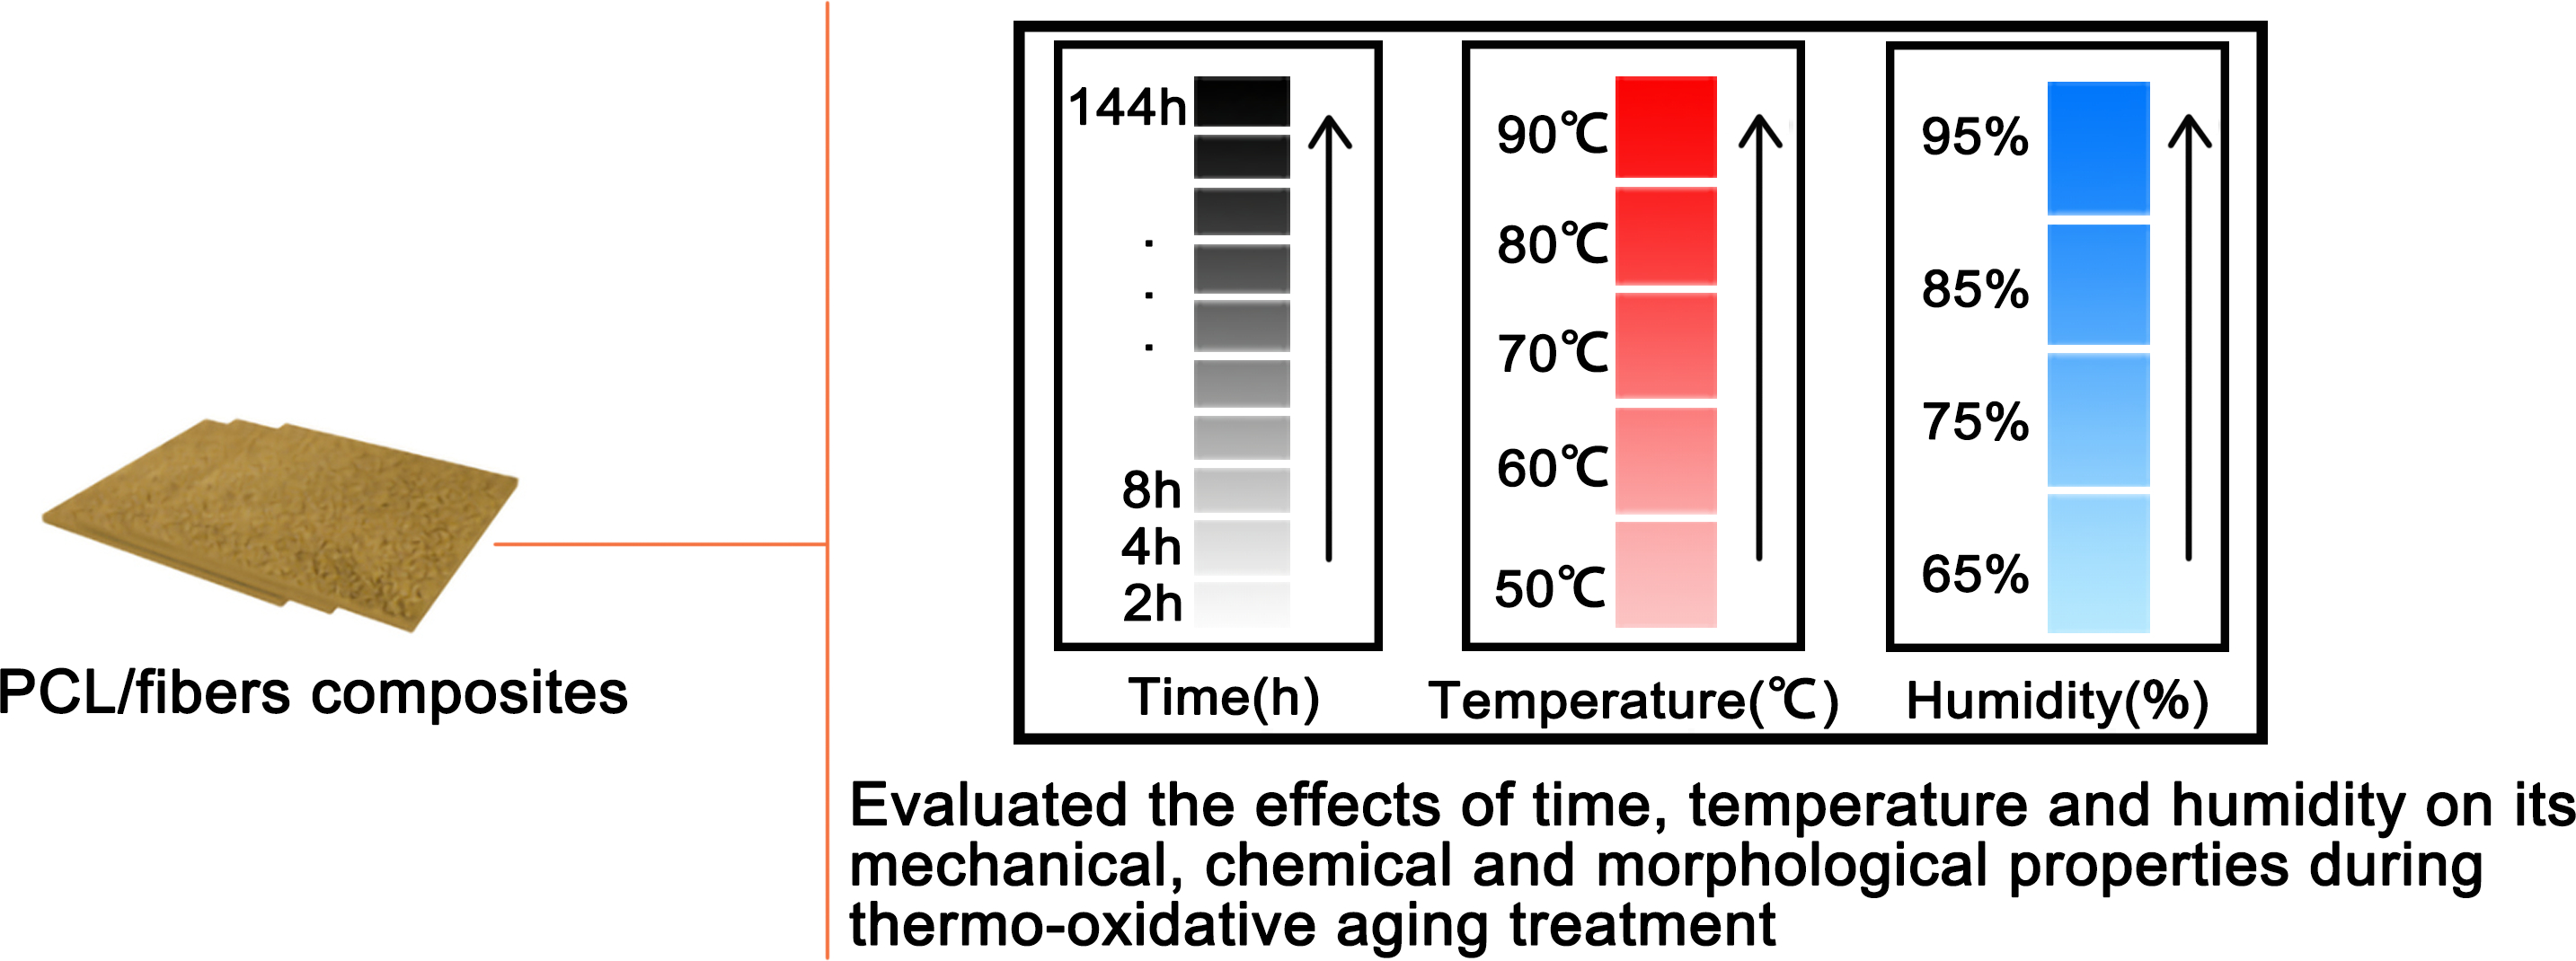 The Accelerated Thermo-Oxidative Aging Characteristics of Wood Fiber/Polycaprolactone Composite: Effect of Temperature, Humidity and Time